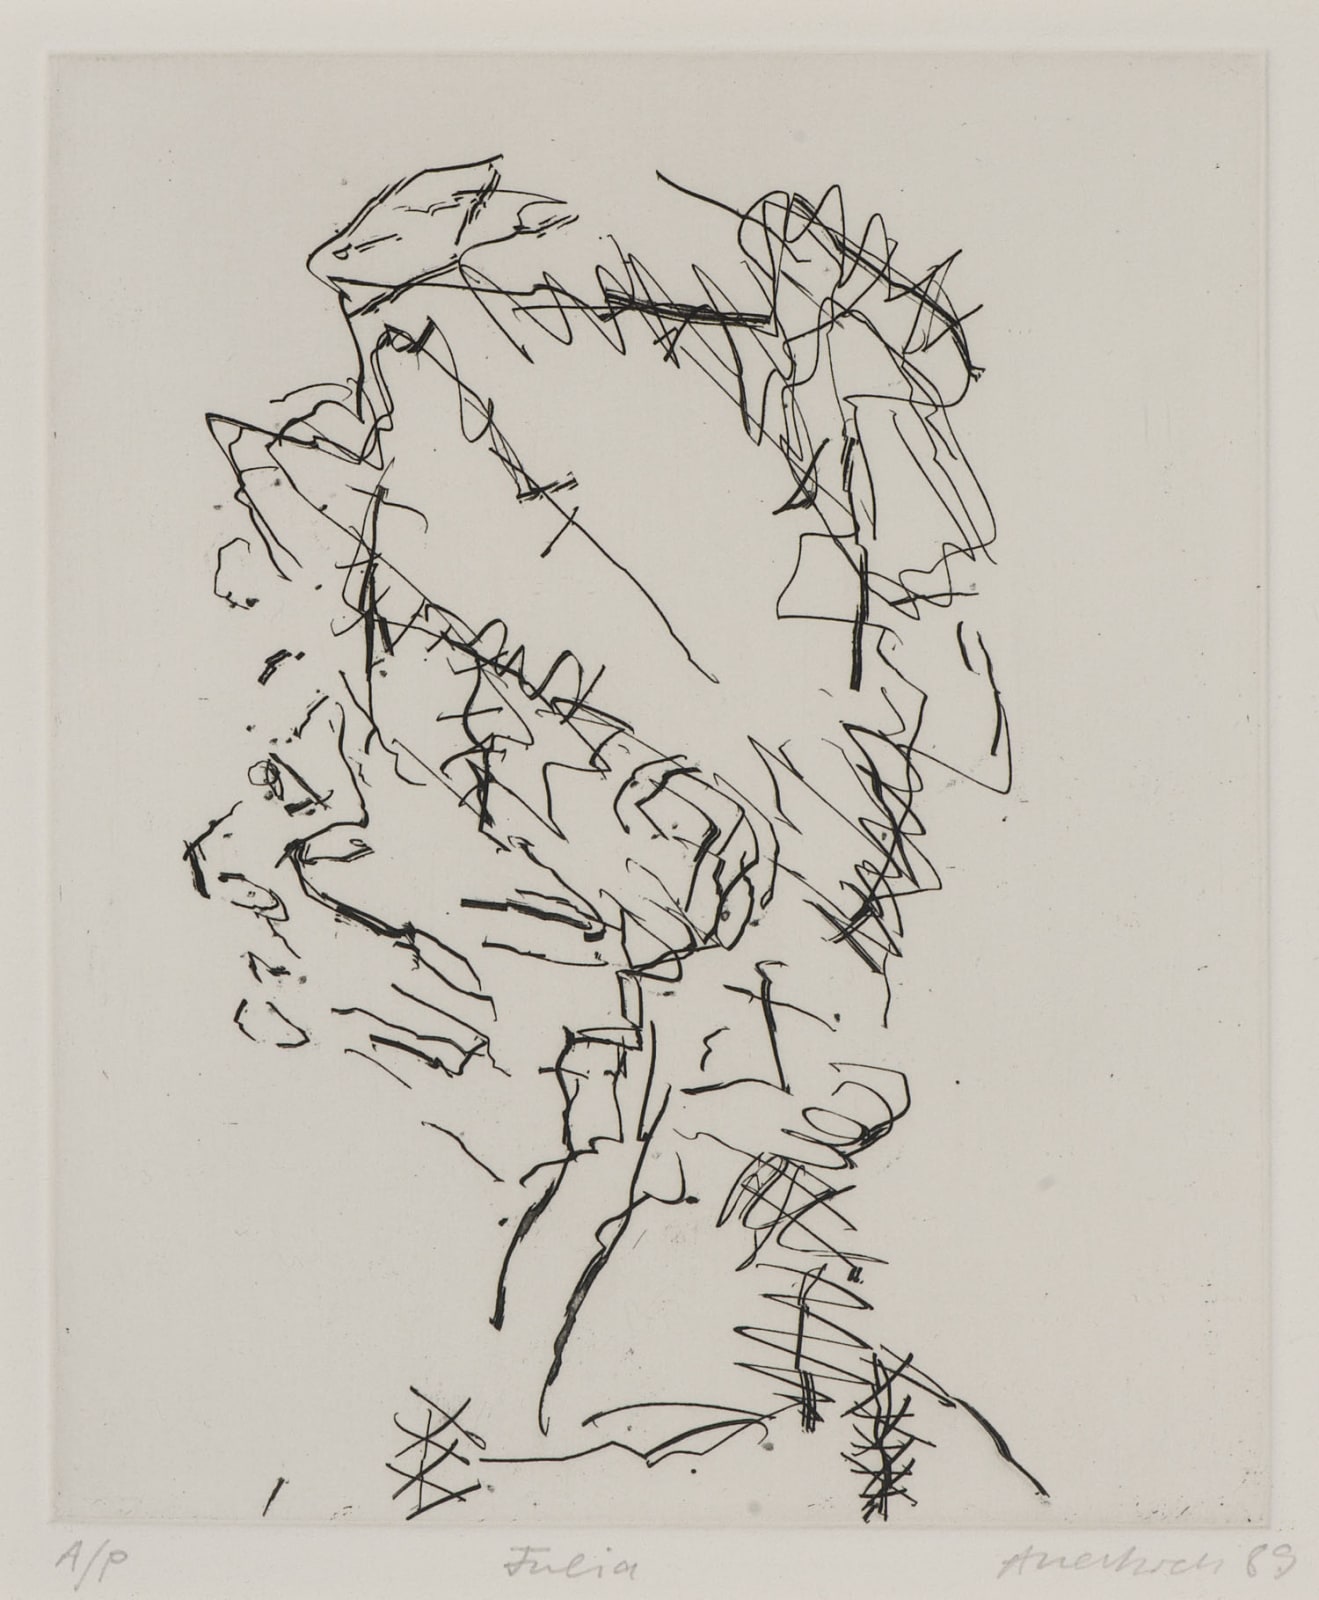 Frank Auerbach (1931-) Julia (part of seven portraits) 1989 Etching, printed on Somerset white paper, artist's proof outside the published edition of 50 19.5 x 16.5 cm Ben Uri Collection © Frank Auerbach, courtesy Marlborough Fine Art To see and discover more about this artist click here